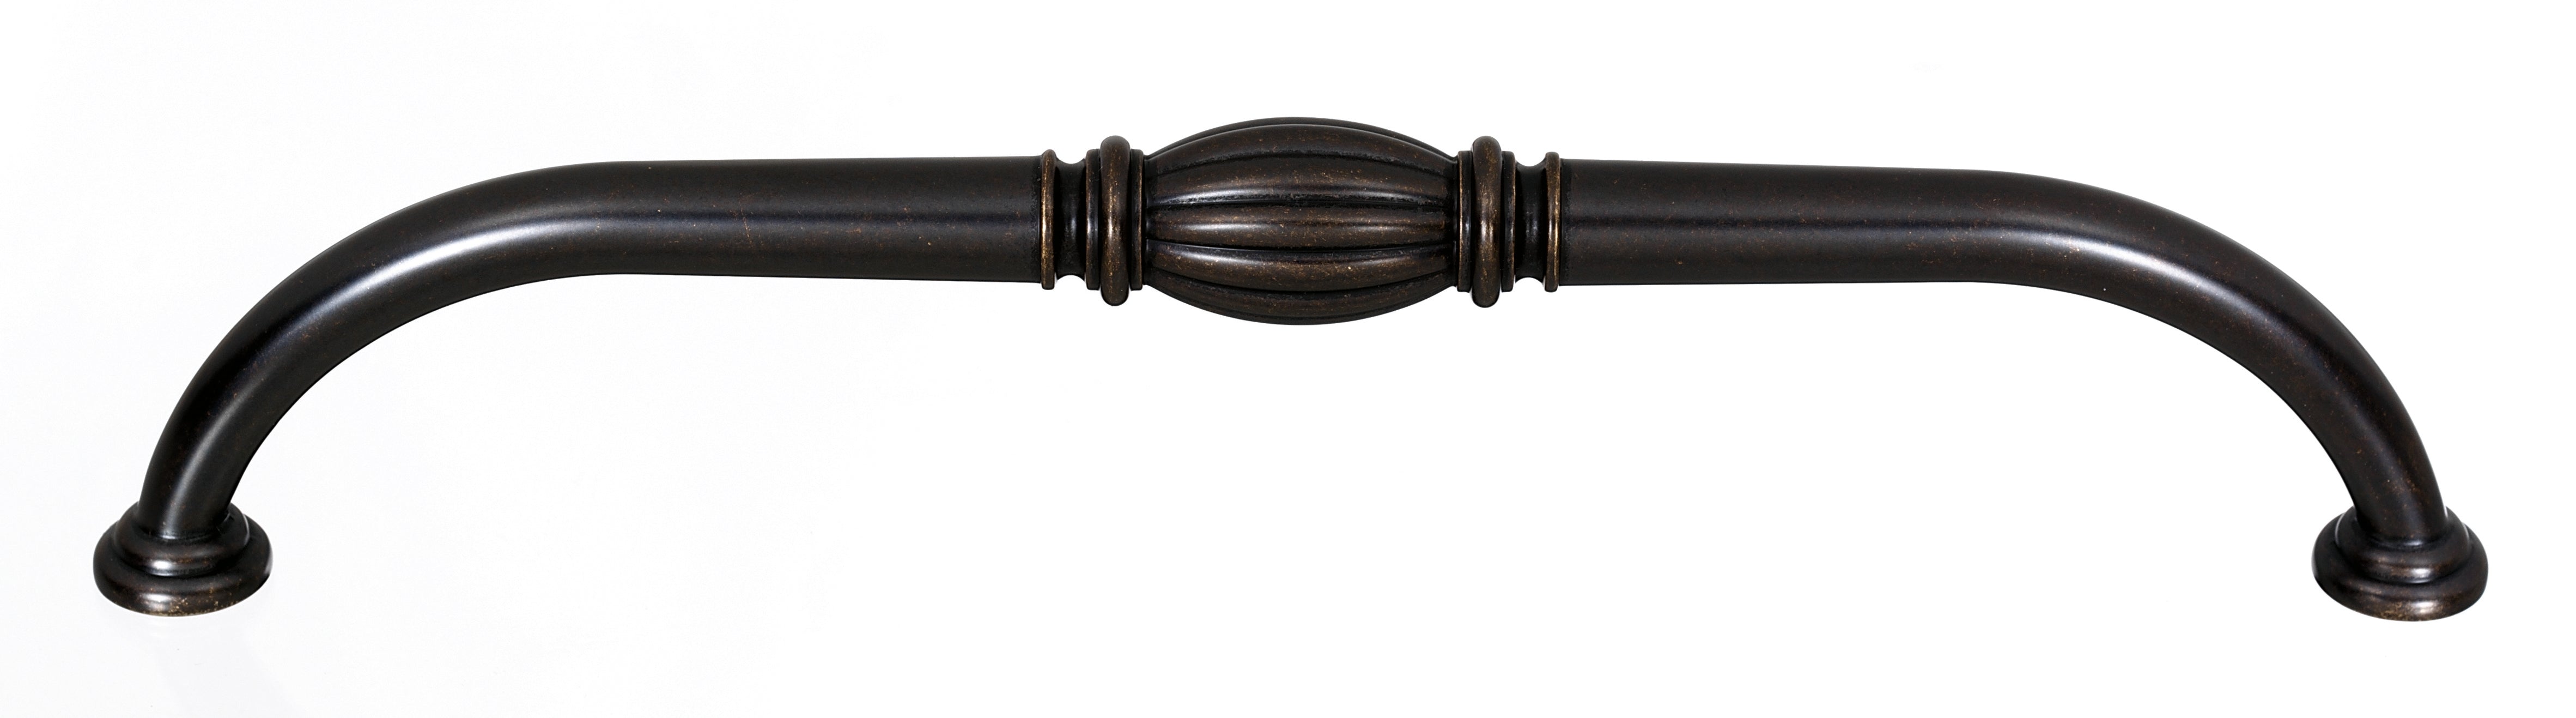 Alno Tuscany 12" Appliance Pull